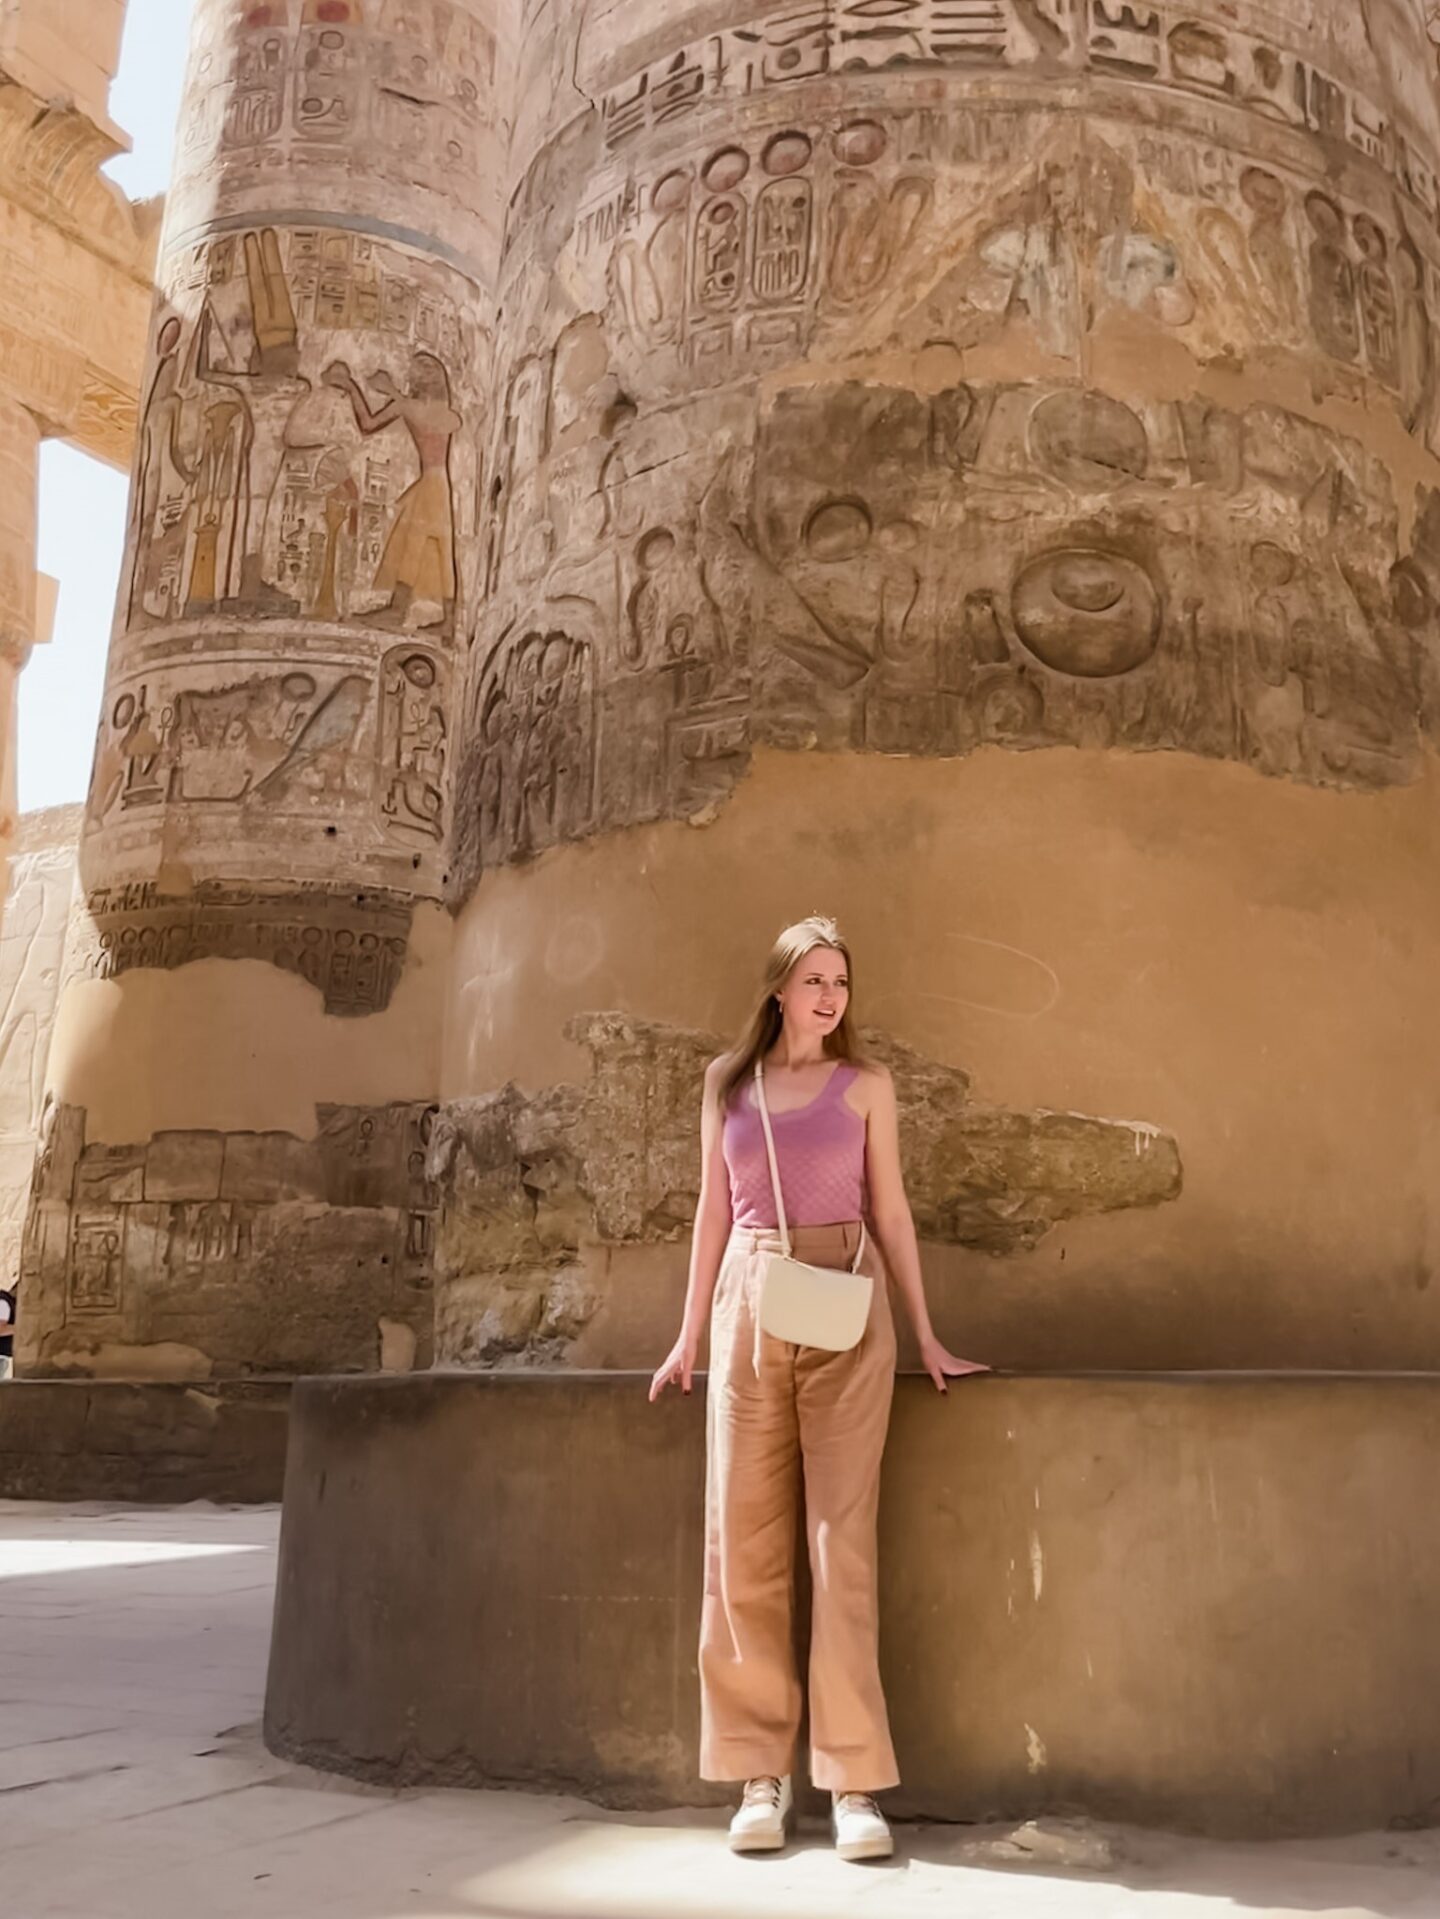 5 Things You Should Do Before Visiting Egypt